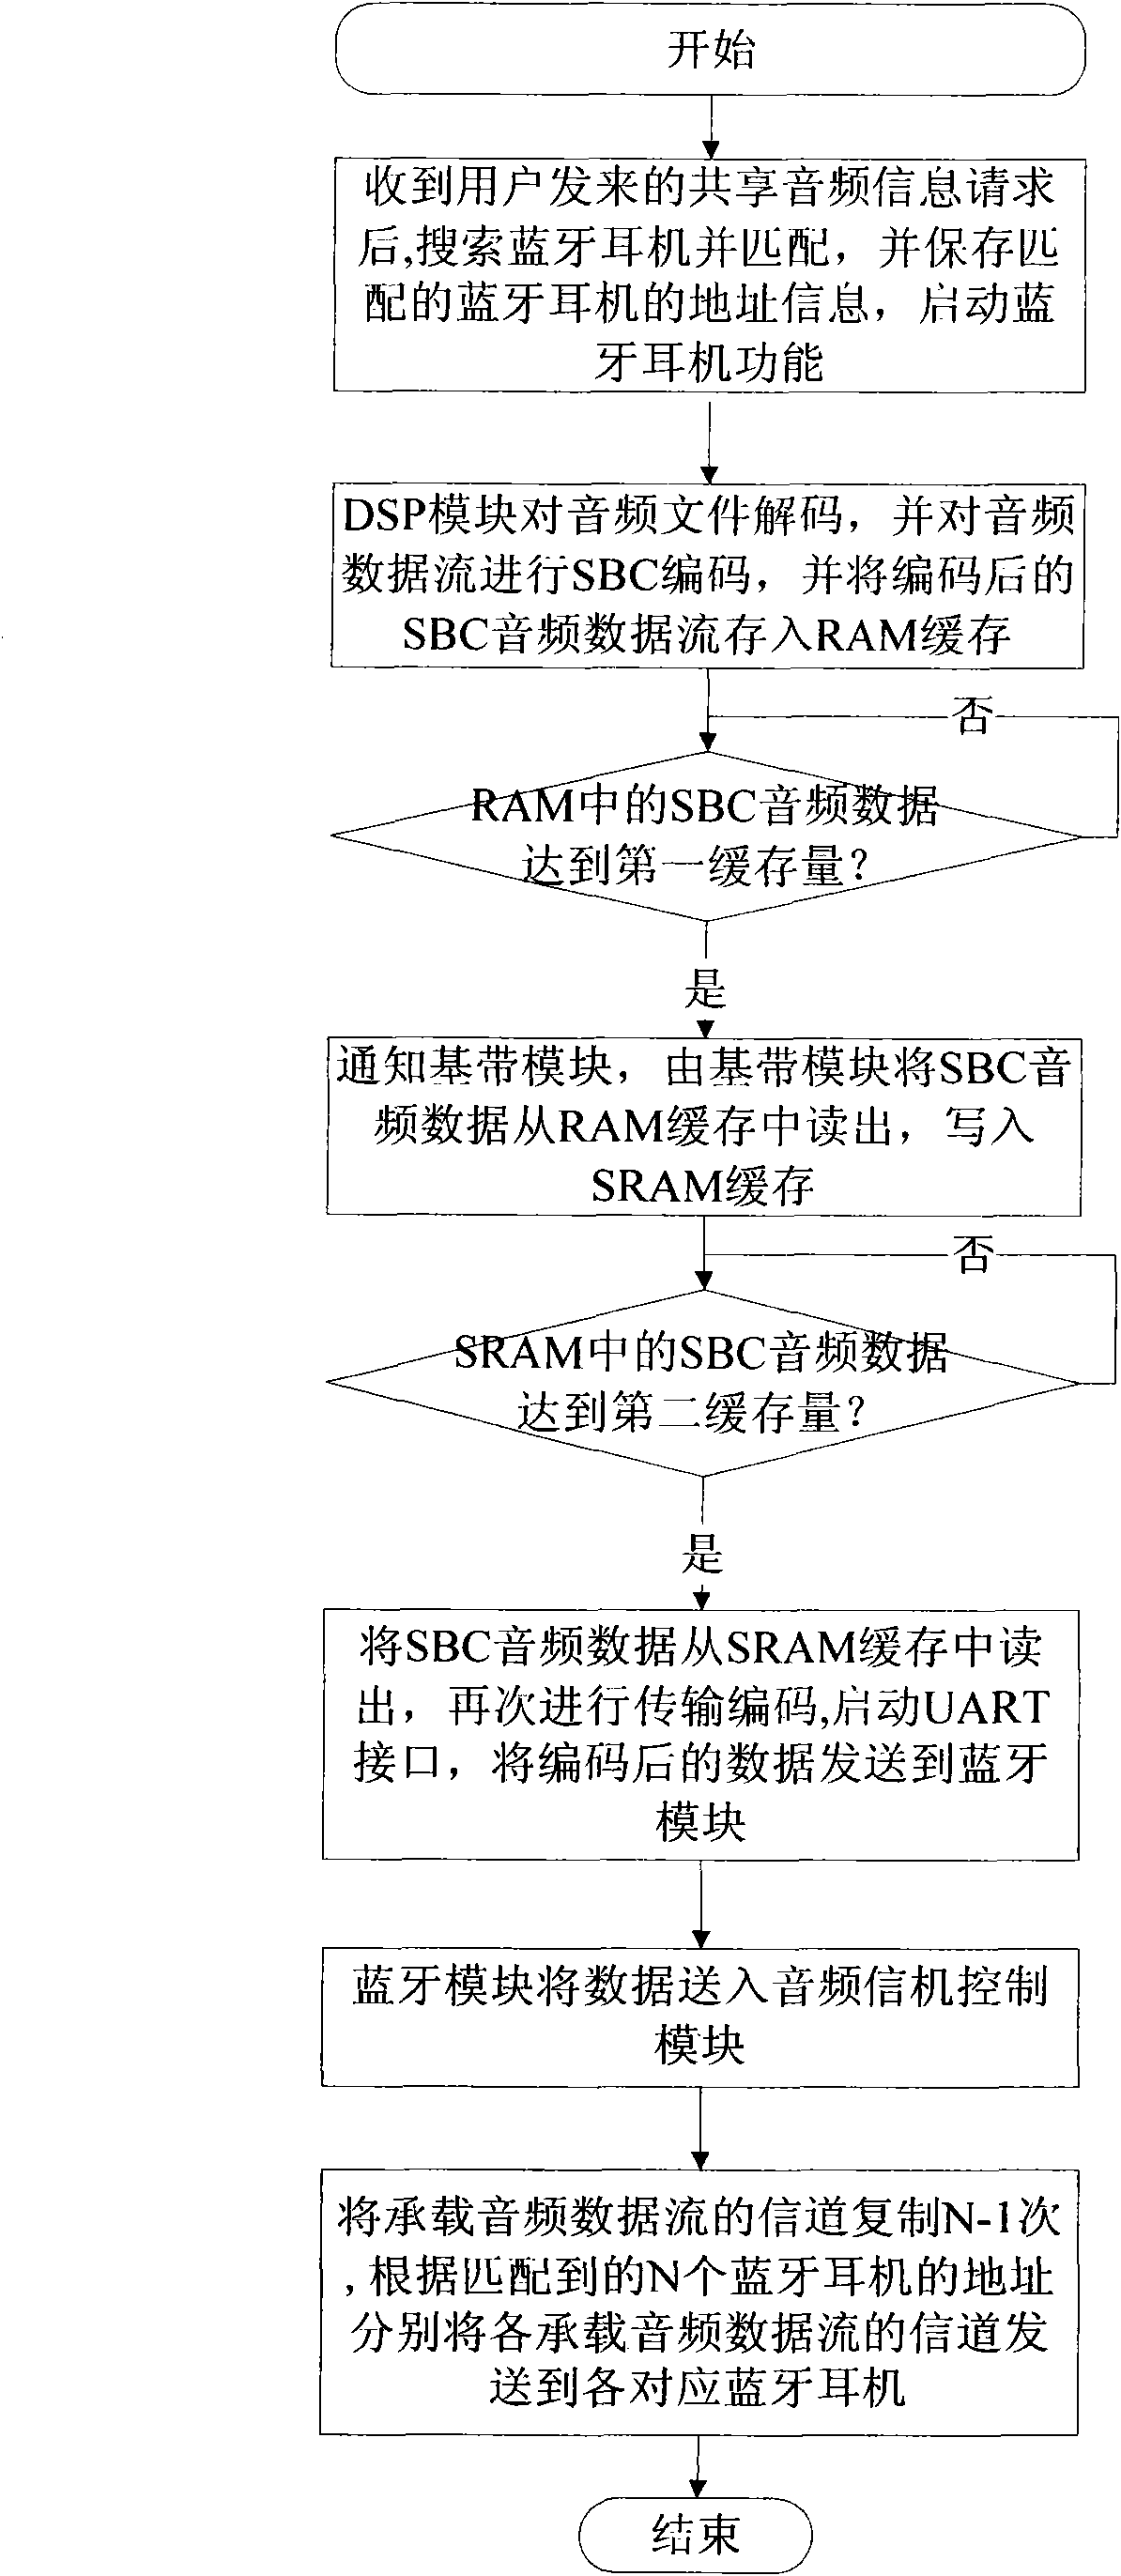 Method and terminal for sharing audio information by multiple users by utilizing Bluetooth headsets